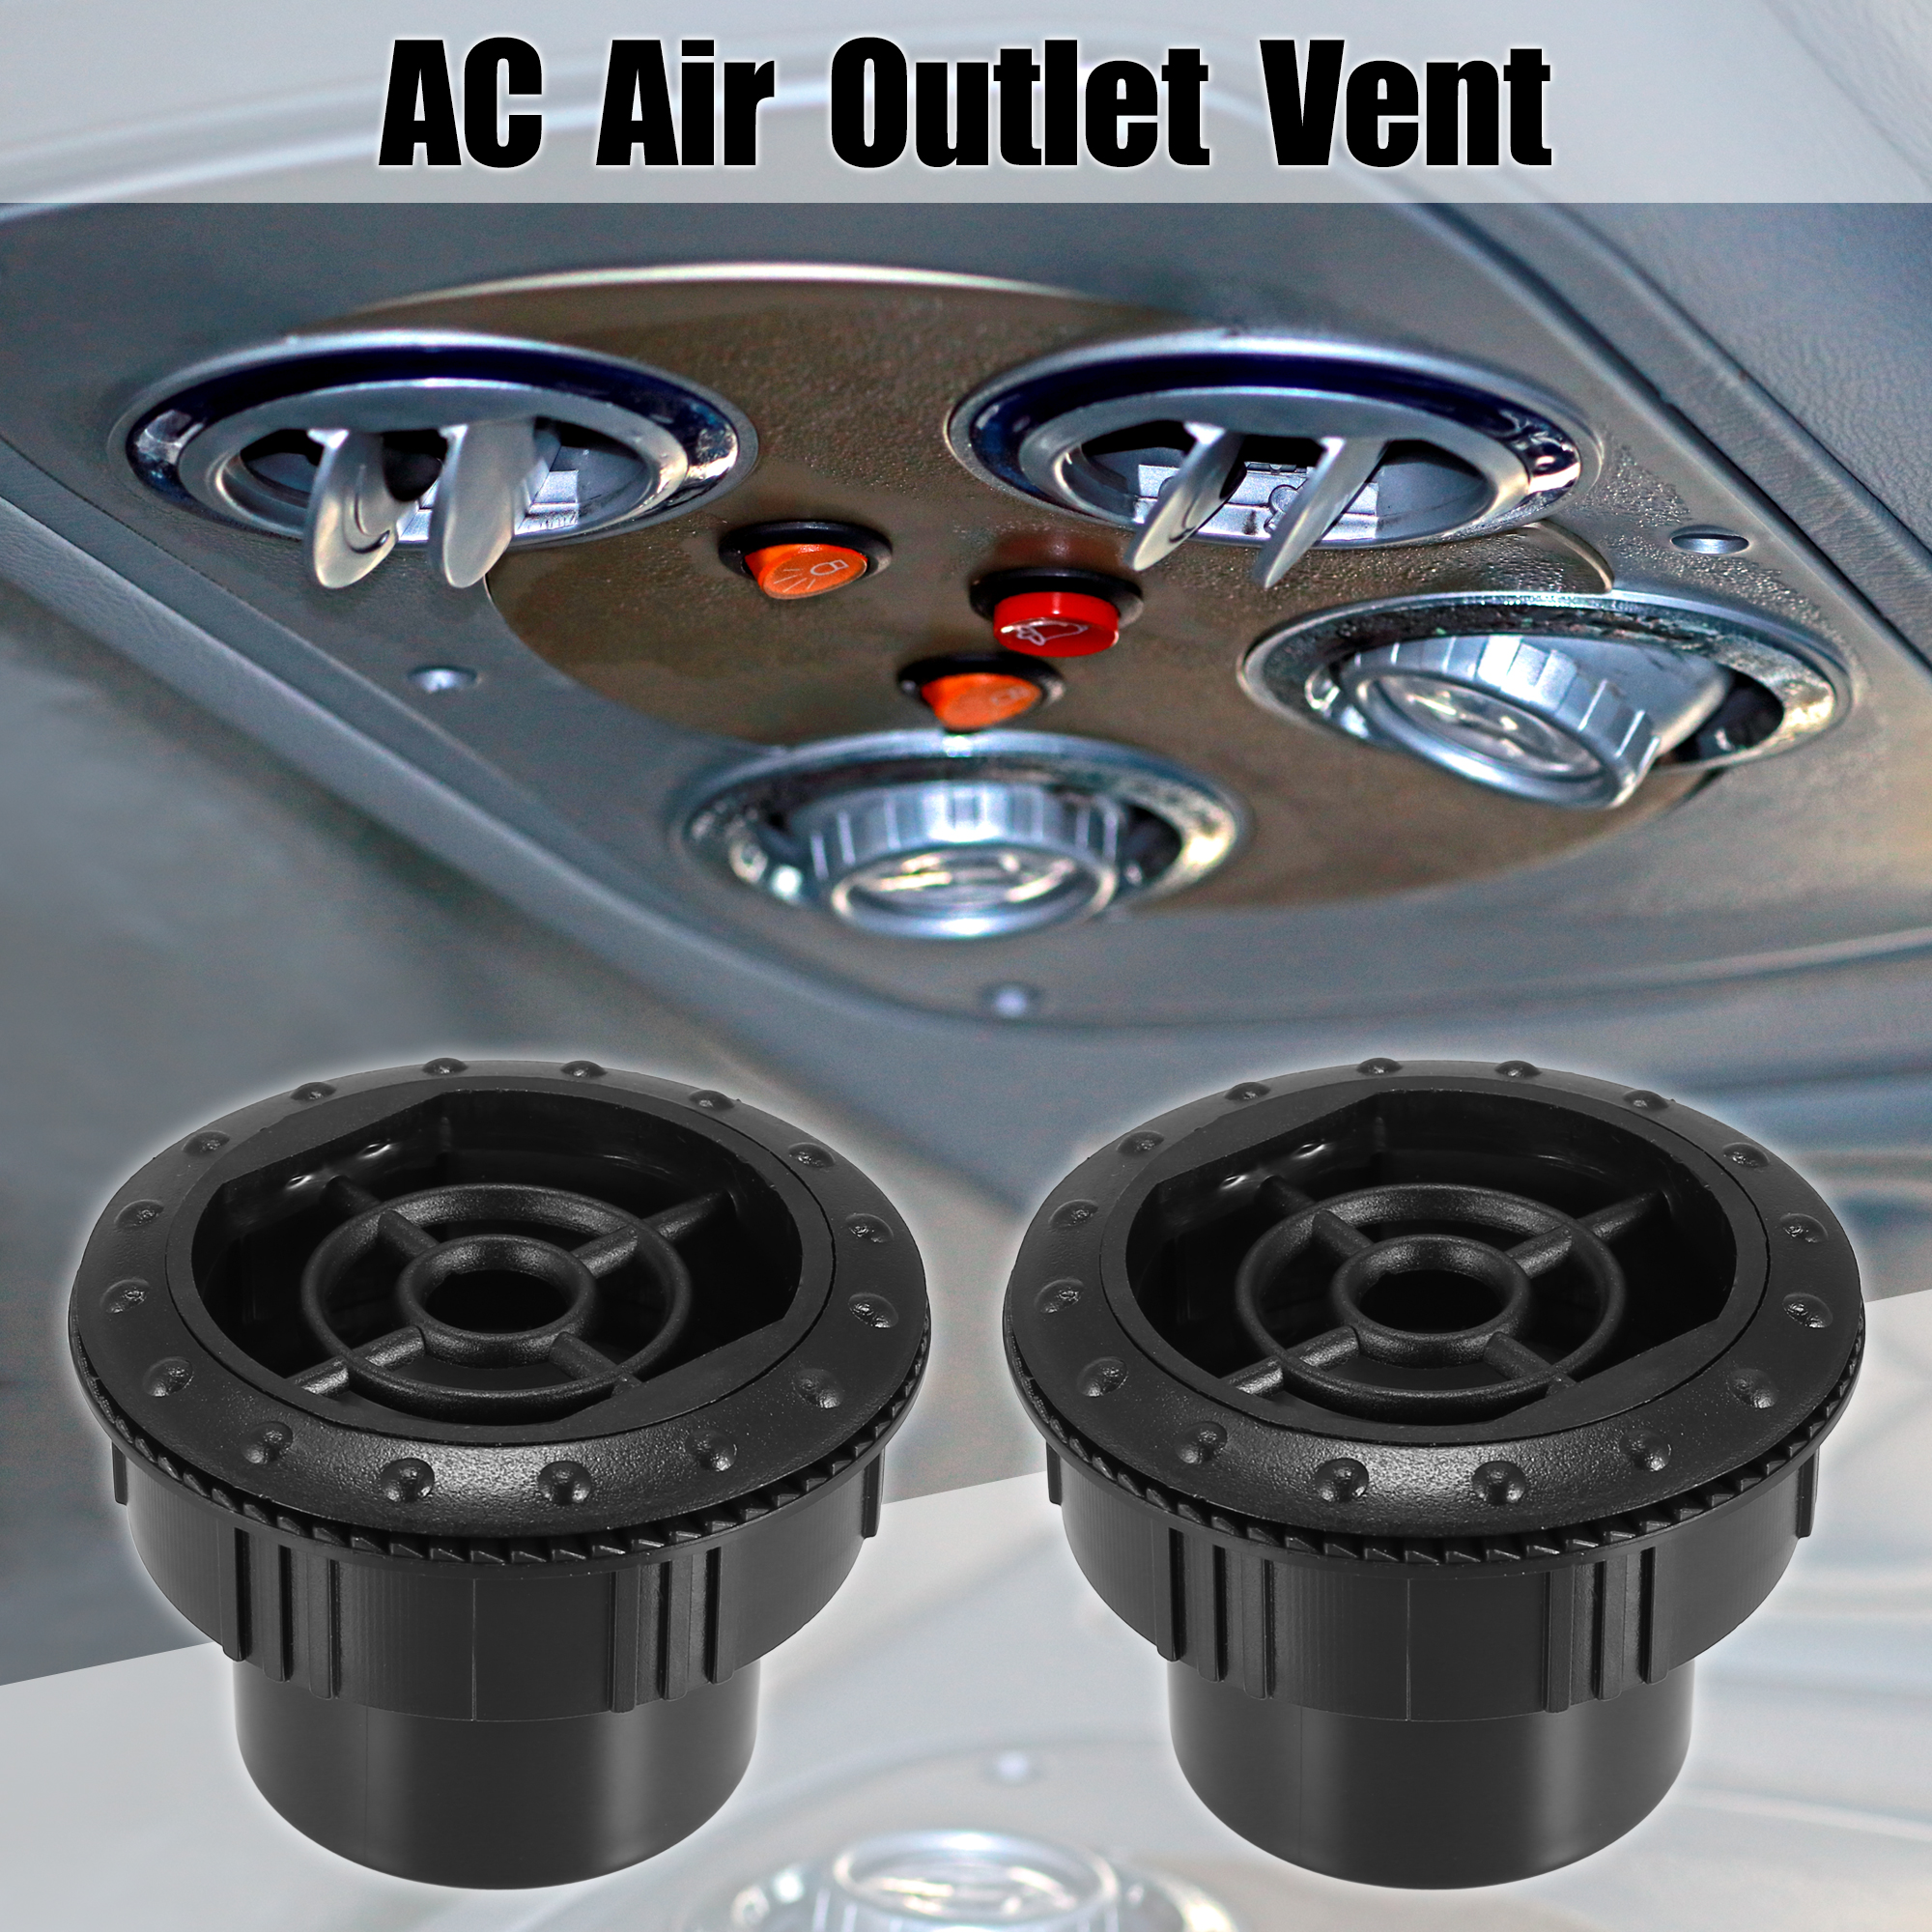 Unique Bargains 4Pcs Rotating AC Air Outlet Vent Ceiling Fits for RV Bus Yacht 70mm 60mm 46mm